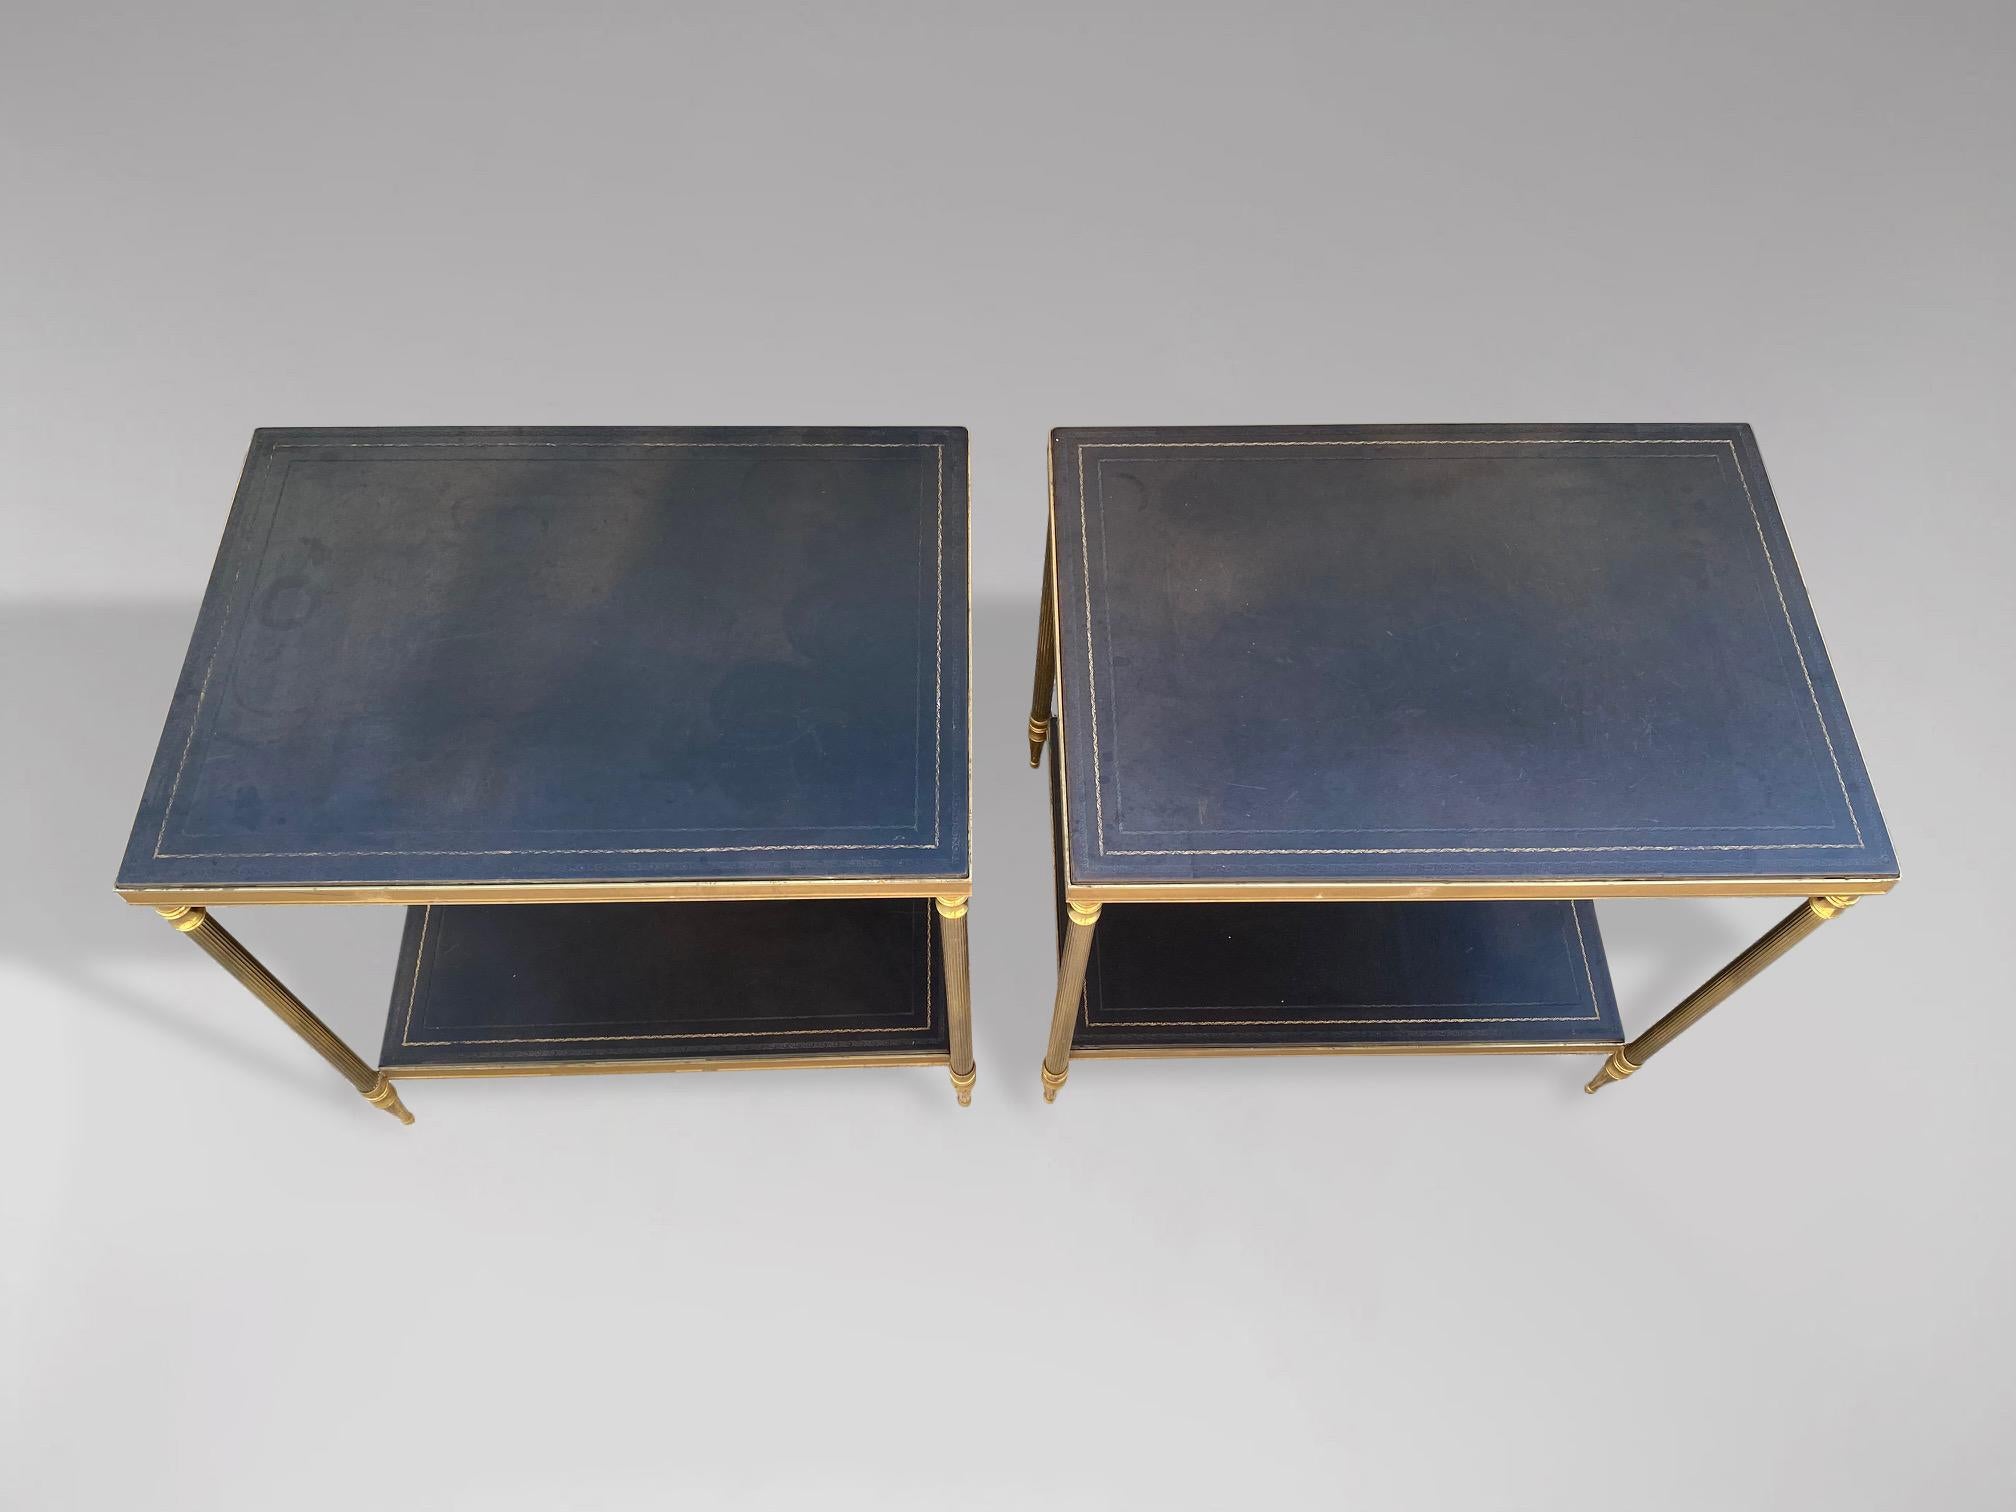 An elegant pair of versatile and substantial two tier leather top and brass side tables. A pair of French neoclassical side or end tables, featuring two gilt tooled black leather rectangular tiers, supported within an elegant brass framework with